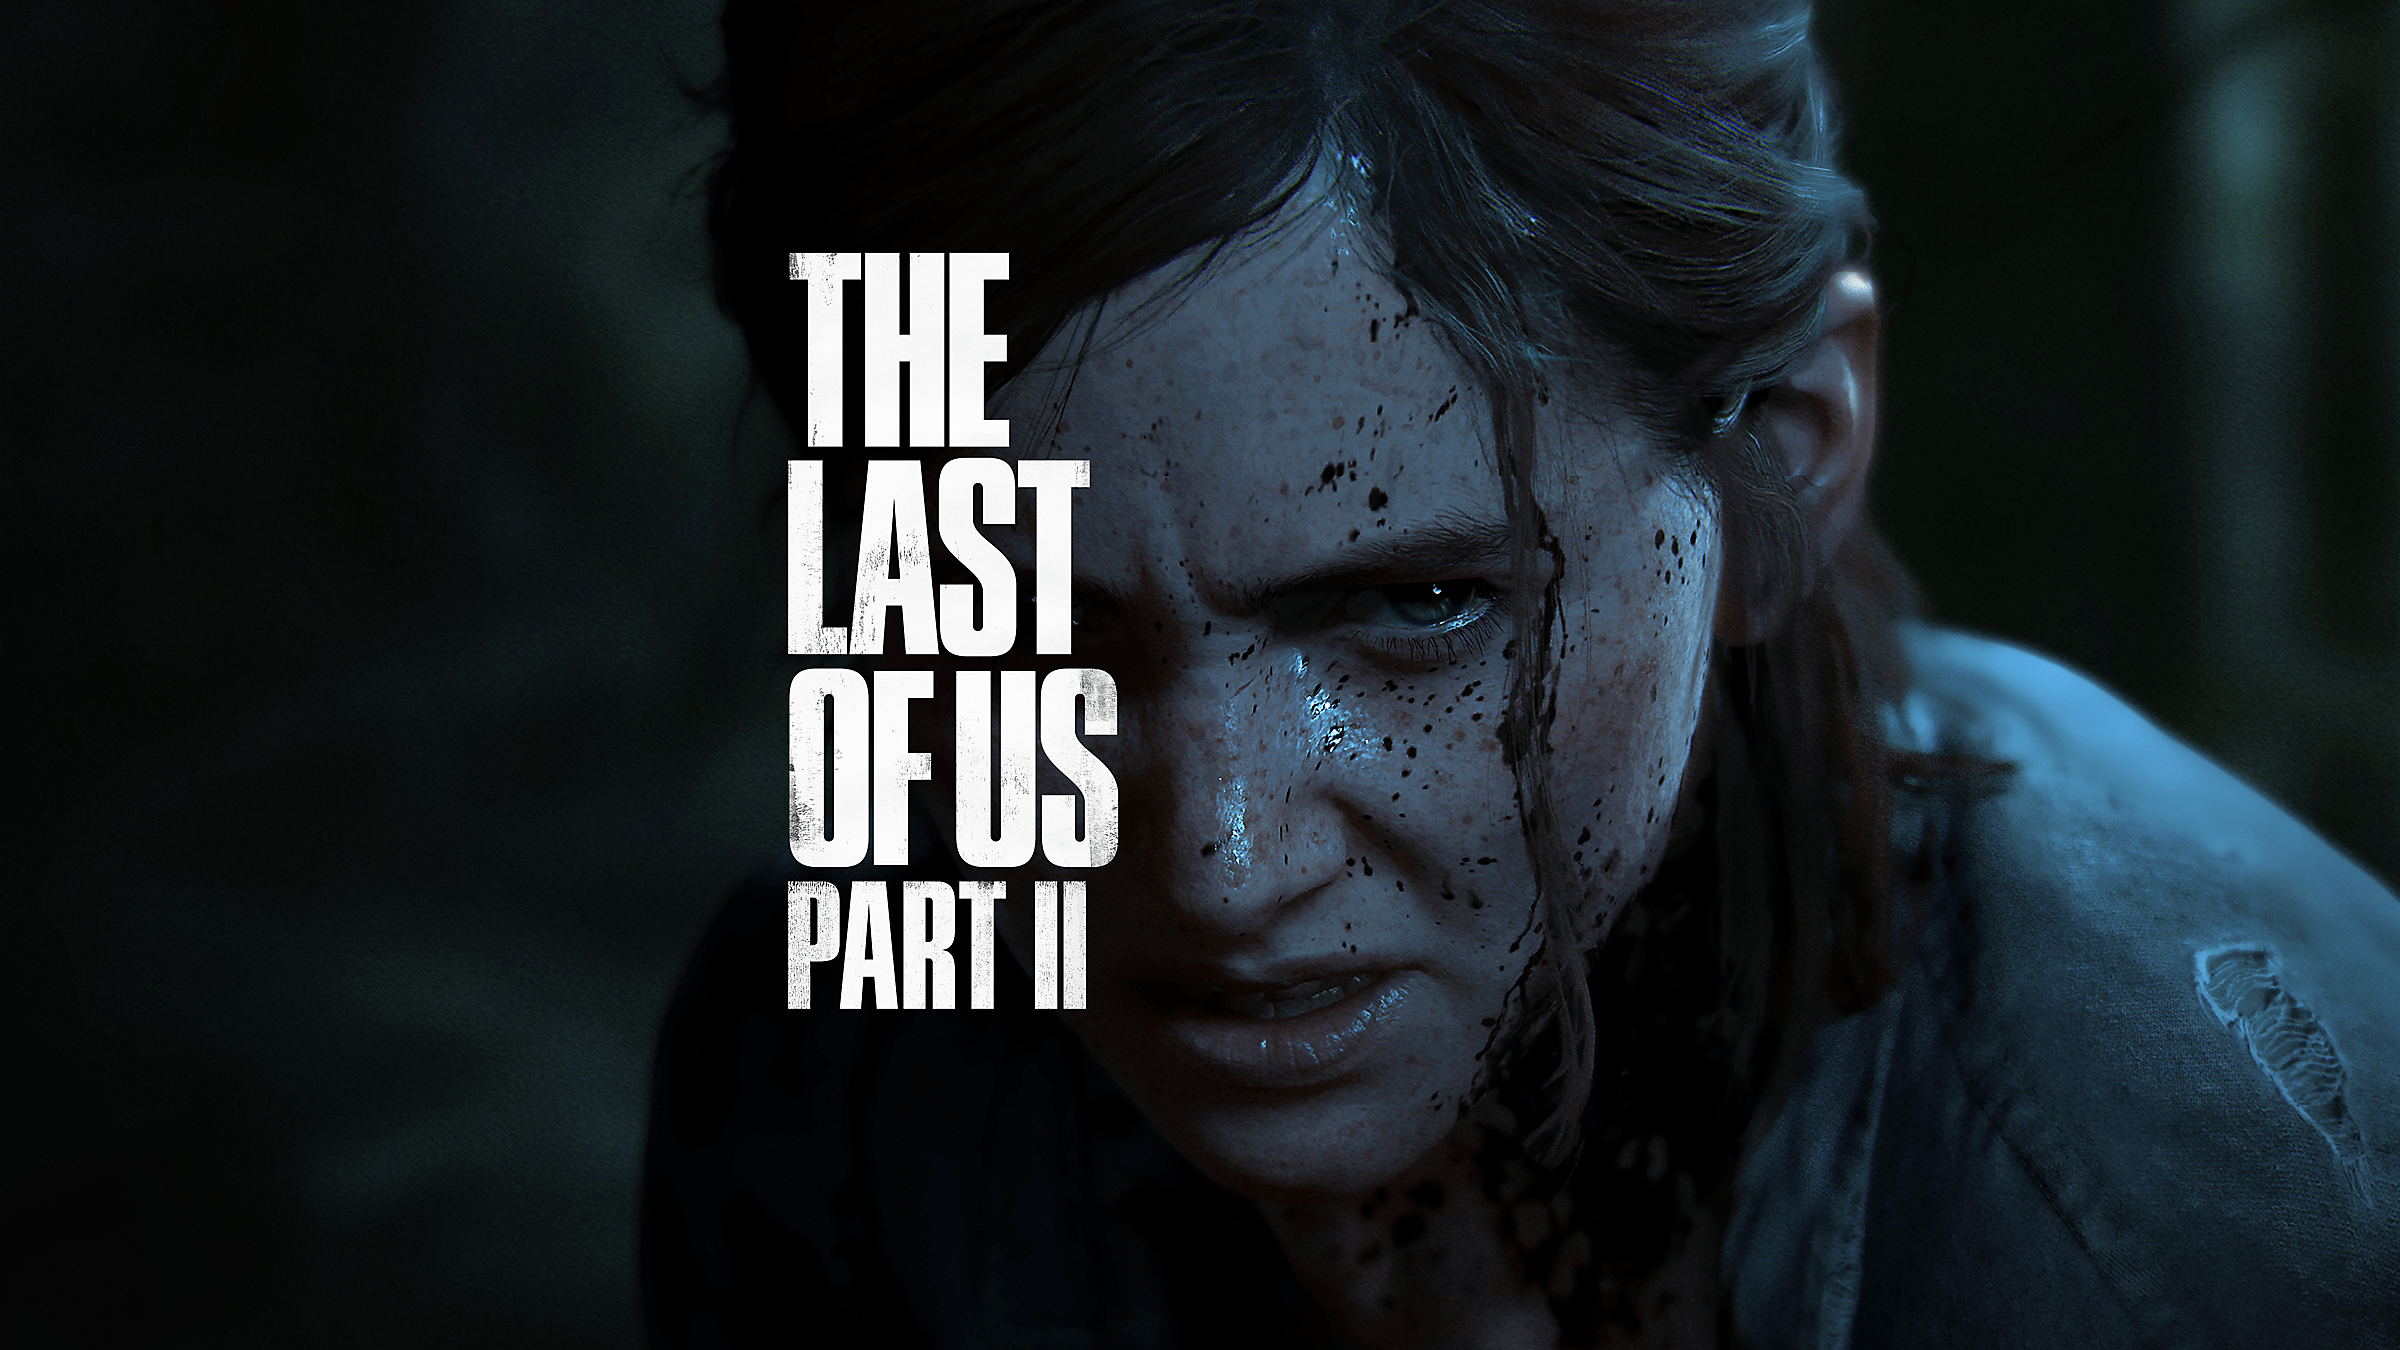 The Last Of Us Ile Rozdziałów The Last Of Us Part II Review - A worthy sequel or over-rated 2nd act?